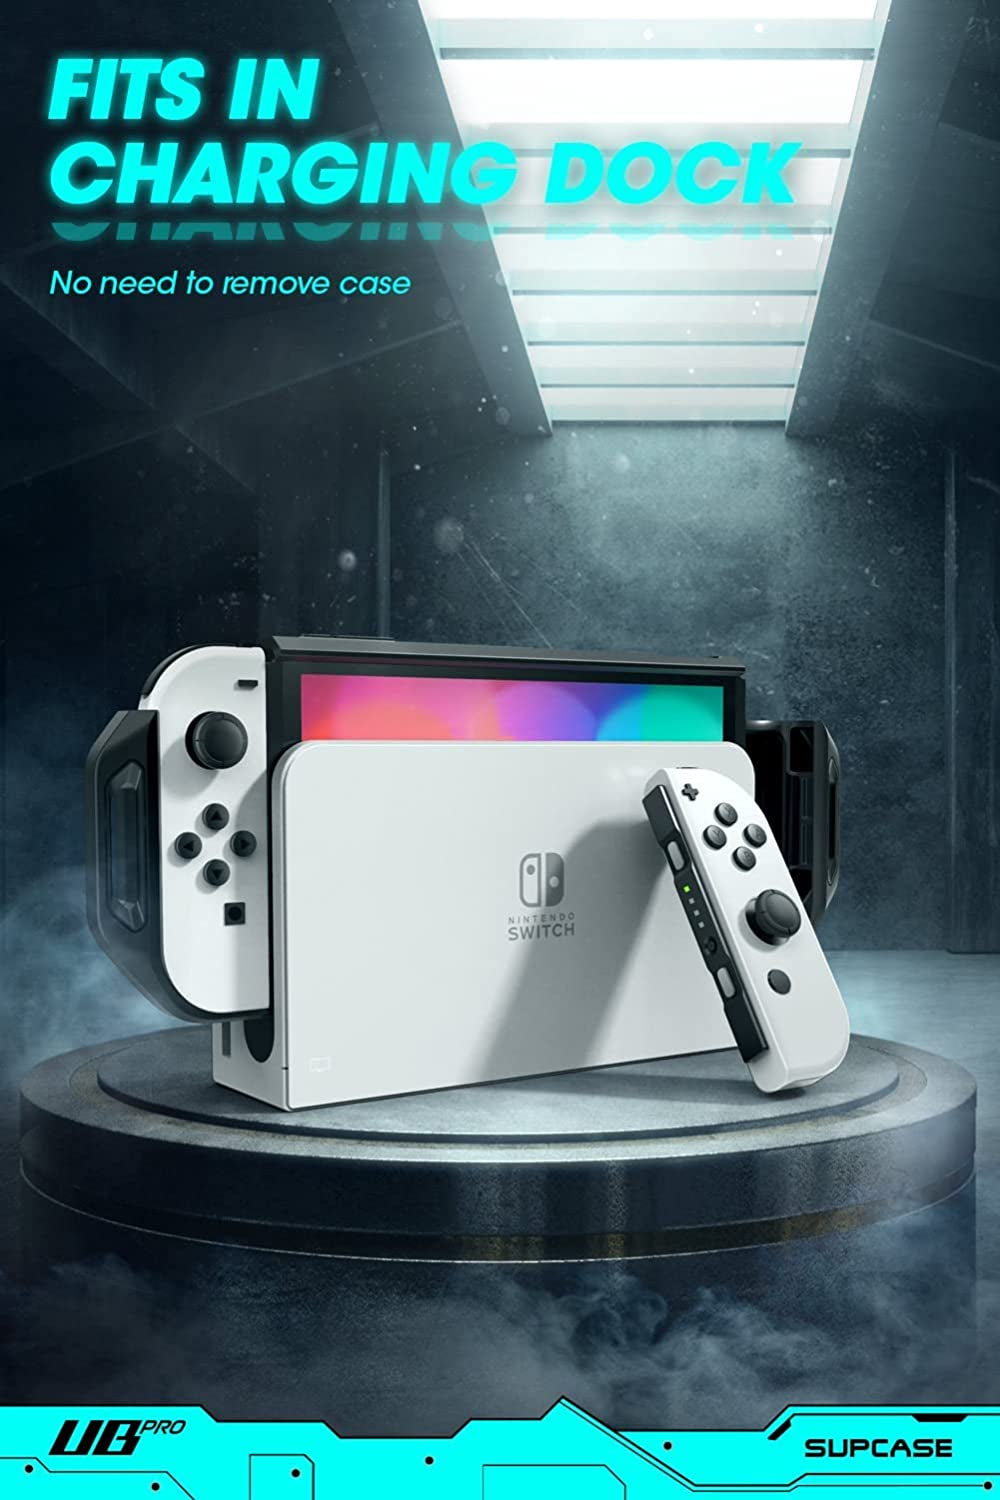 Rugged Protective Case for Nintendo Switch OLED Model - Dockable Unicorn Beetle Pro Series (Frostblack)